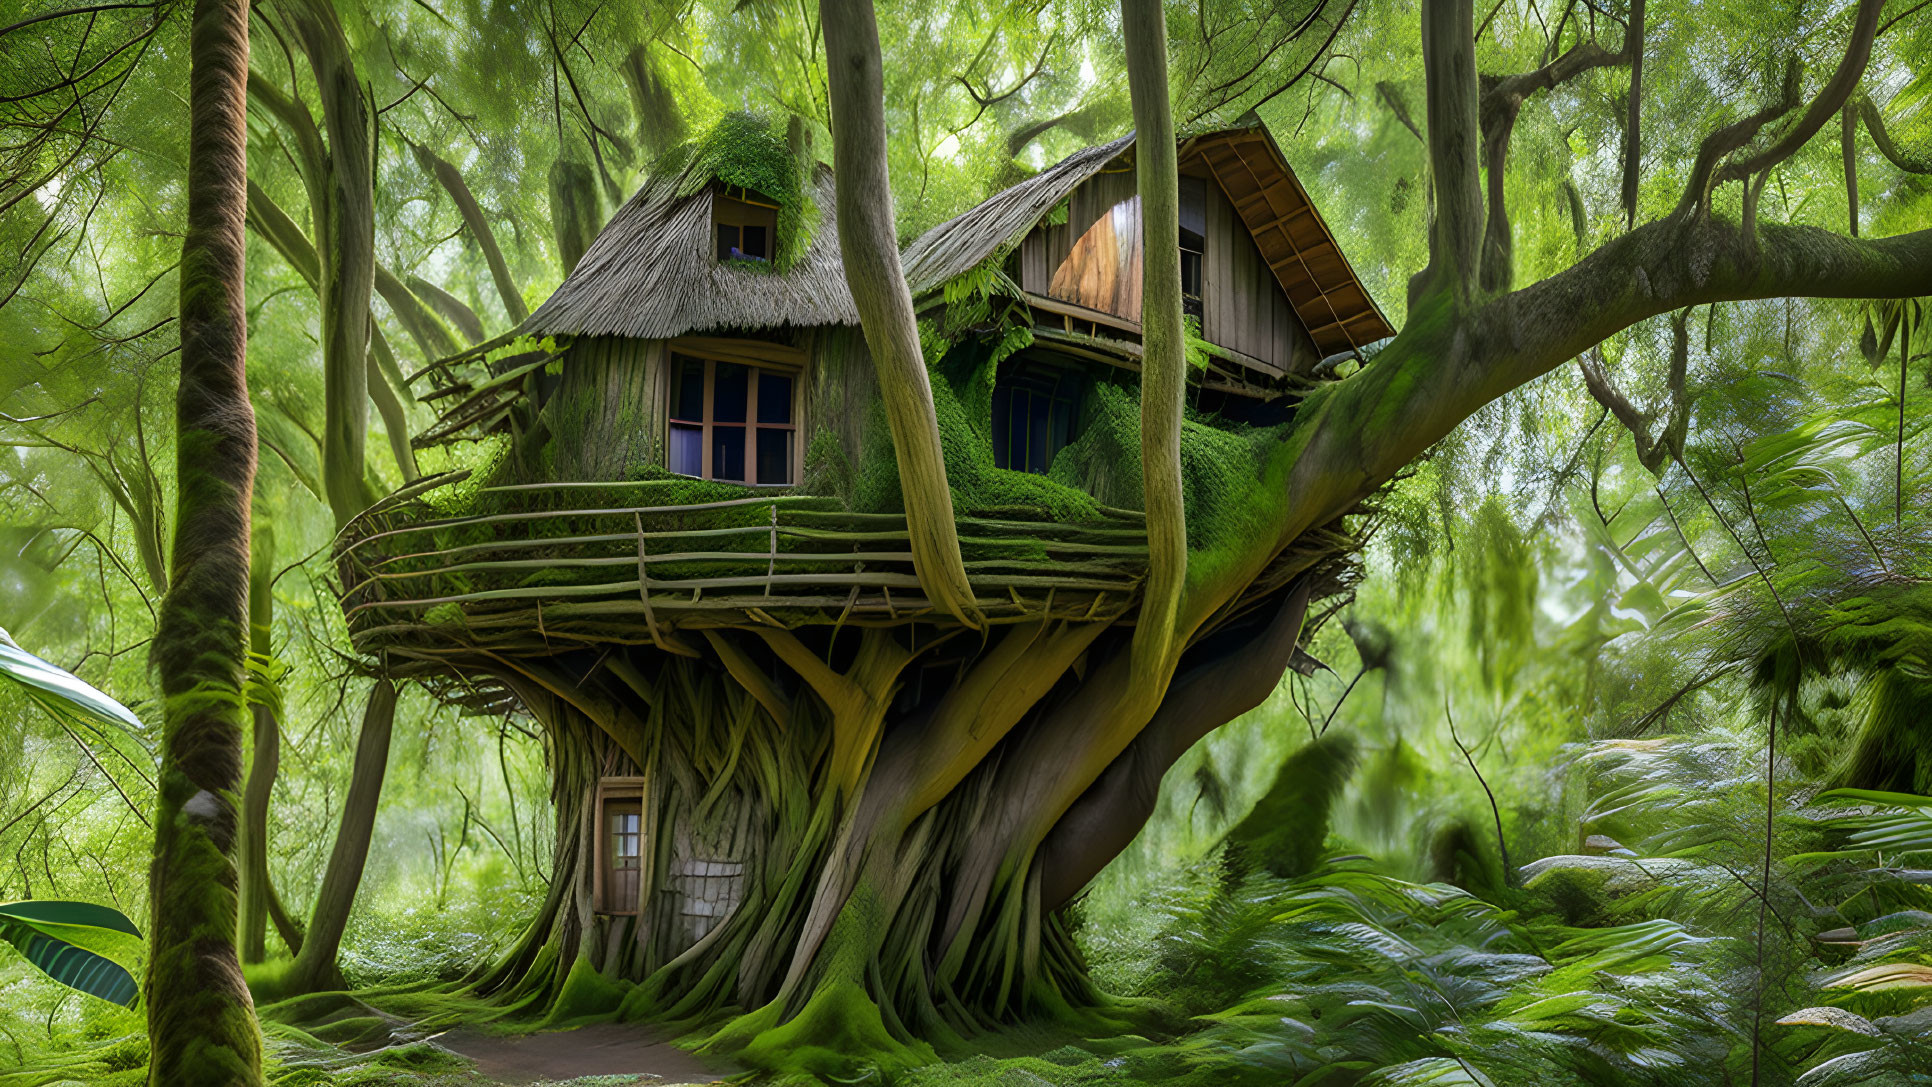 The Tree House in Cerwood Forest